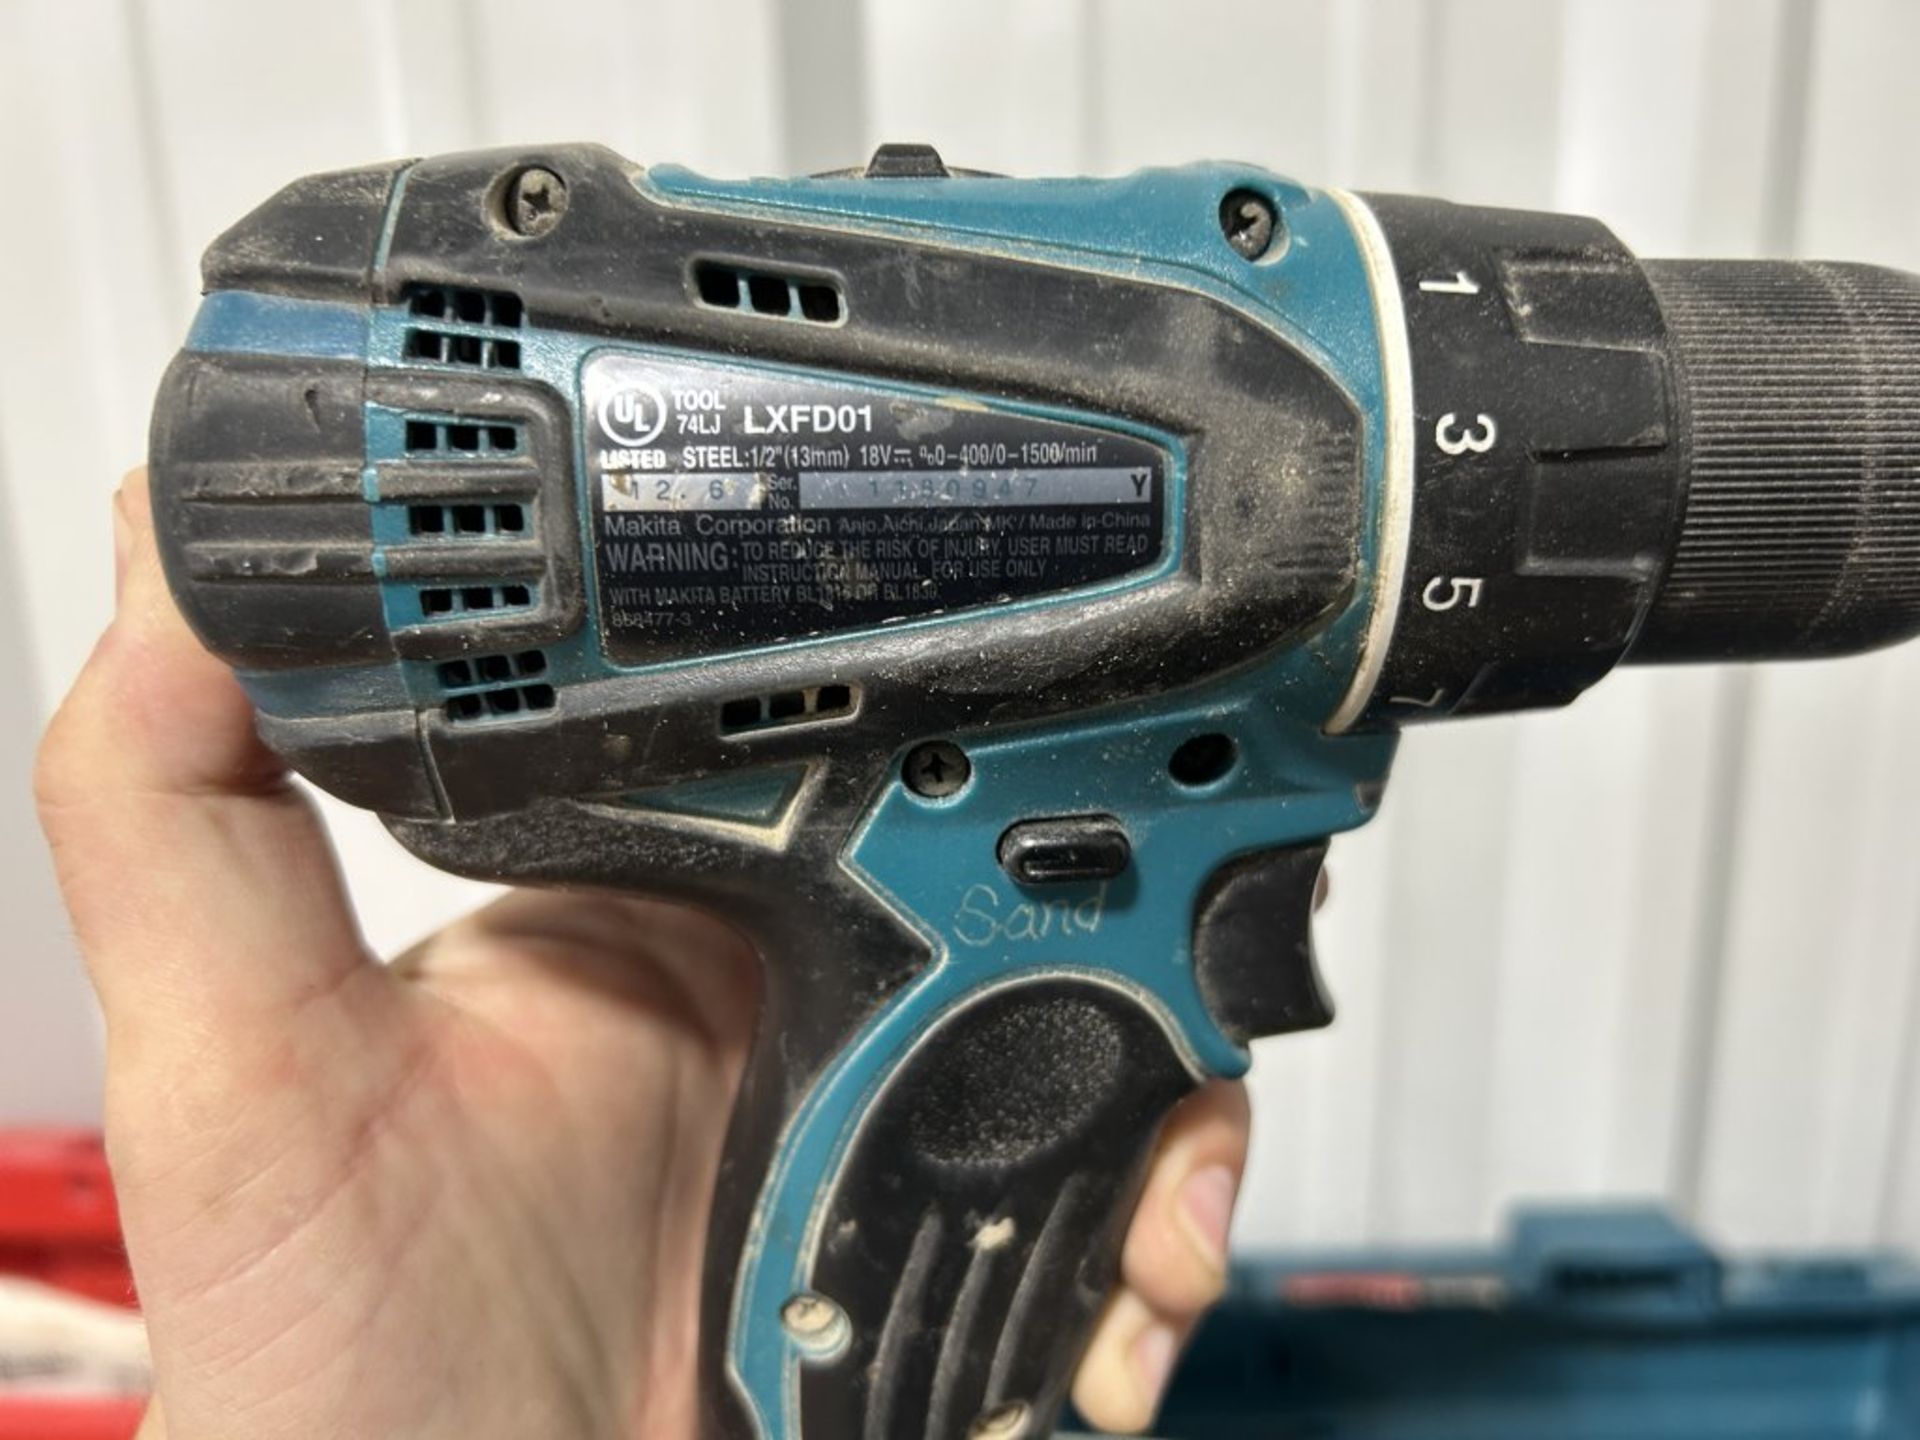 MAKITA LXFD01 18V 2.0AH 1/2'' CORDLESS DRILL WITH CHARGER & CASE - Image 3 of 3